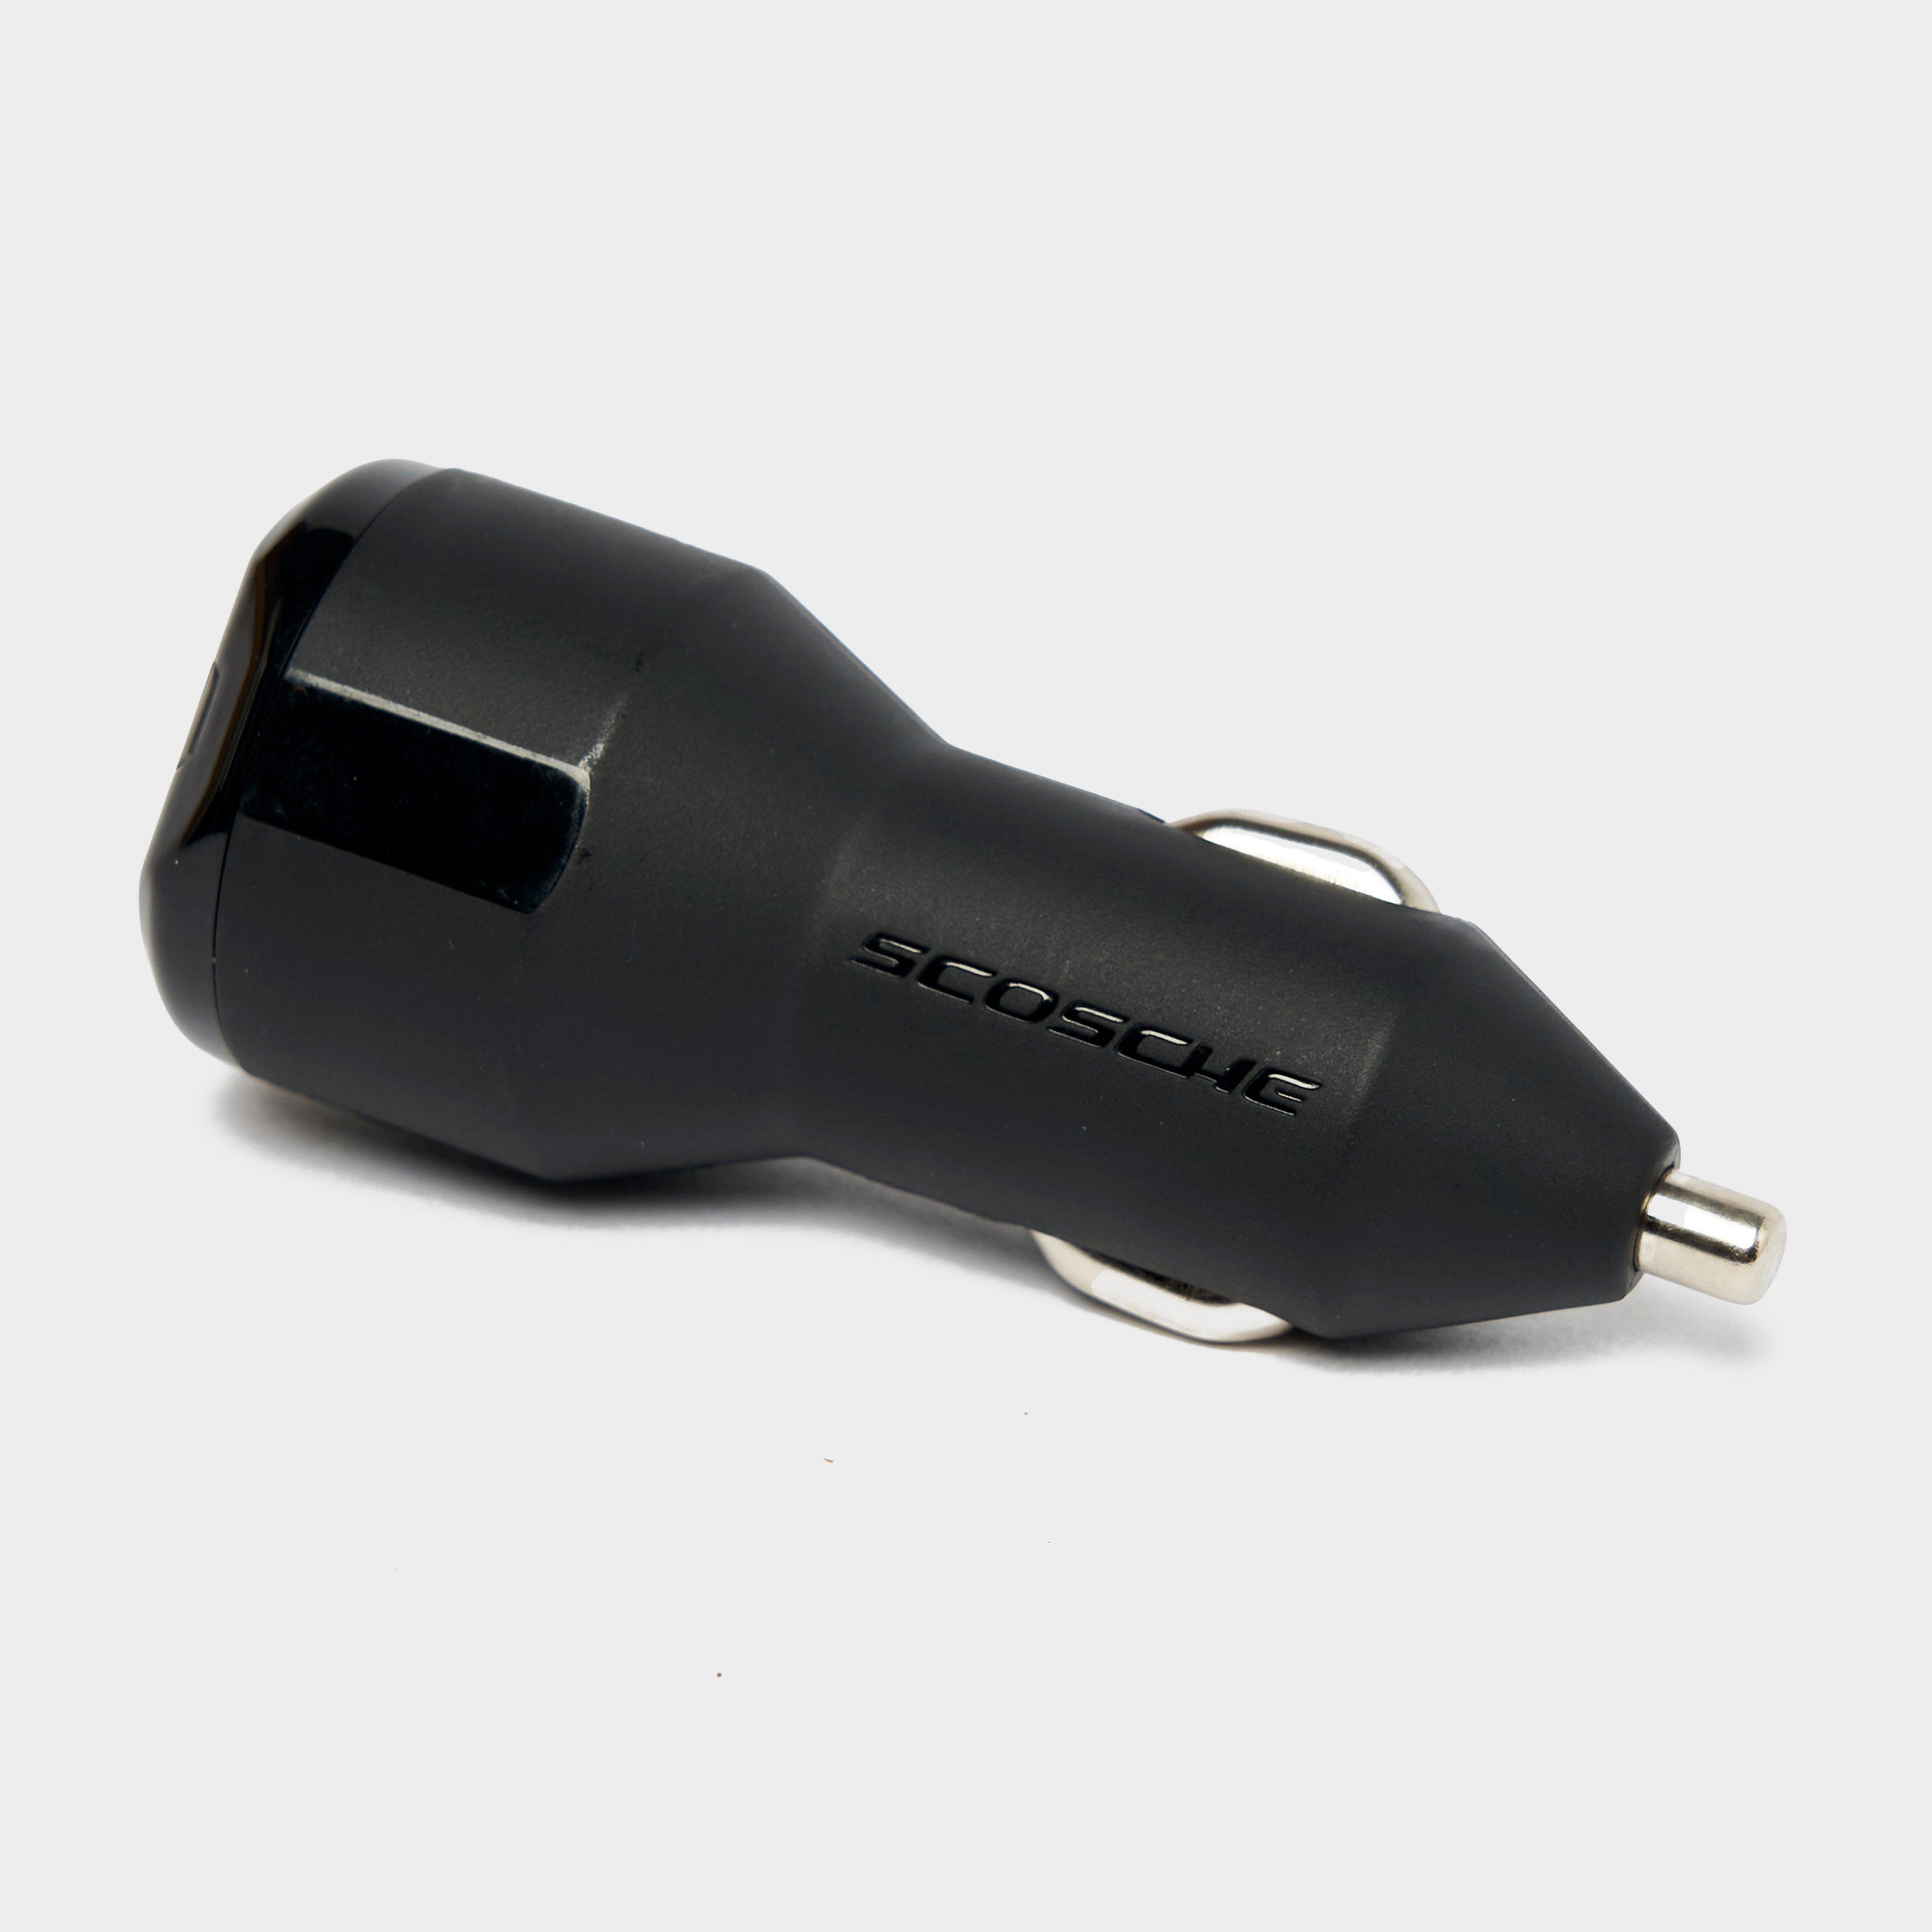 Scosche 30w Combo Car Charger - Black/charg  Black/charg